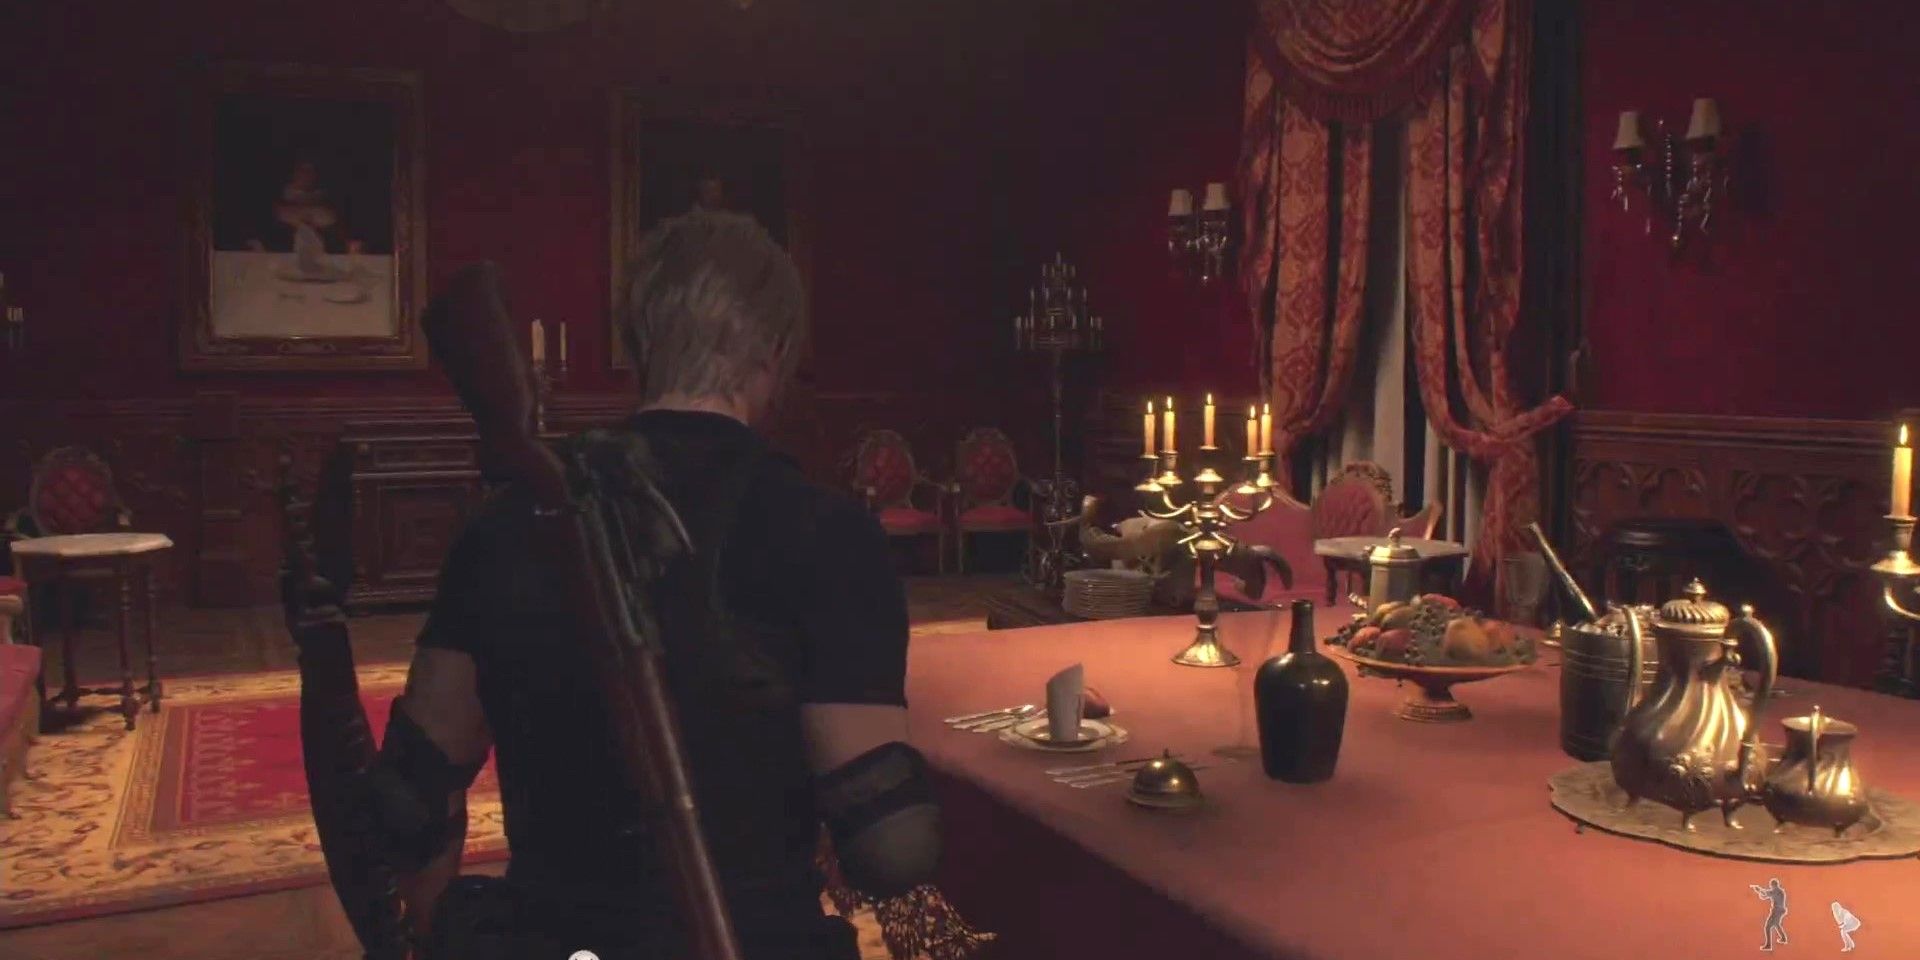 Leon in the dining hall of the castle in the Resident Evil 4 Remake